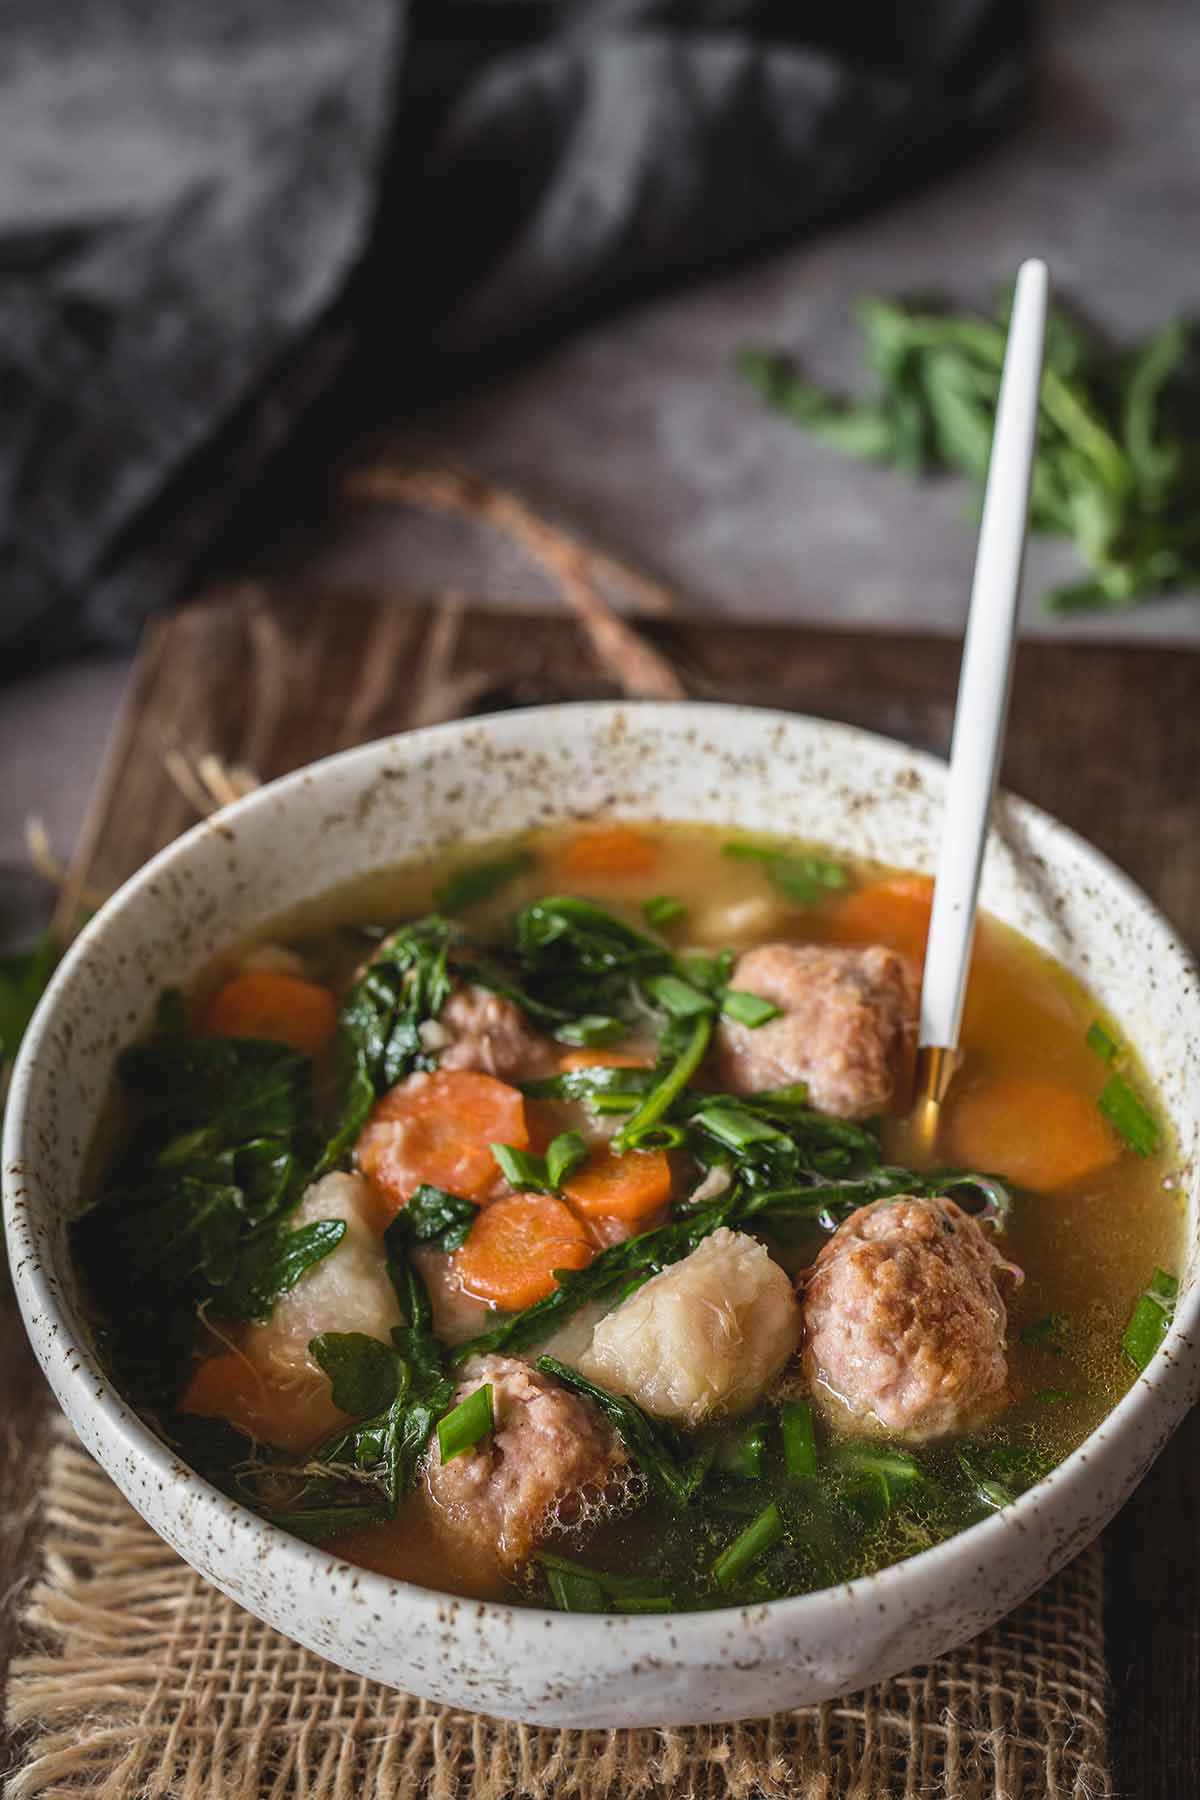 Cozy taro soup with arugula and turkey meatballs in chicken stock